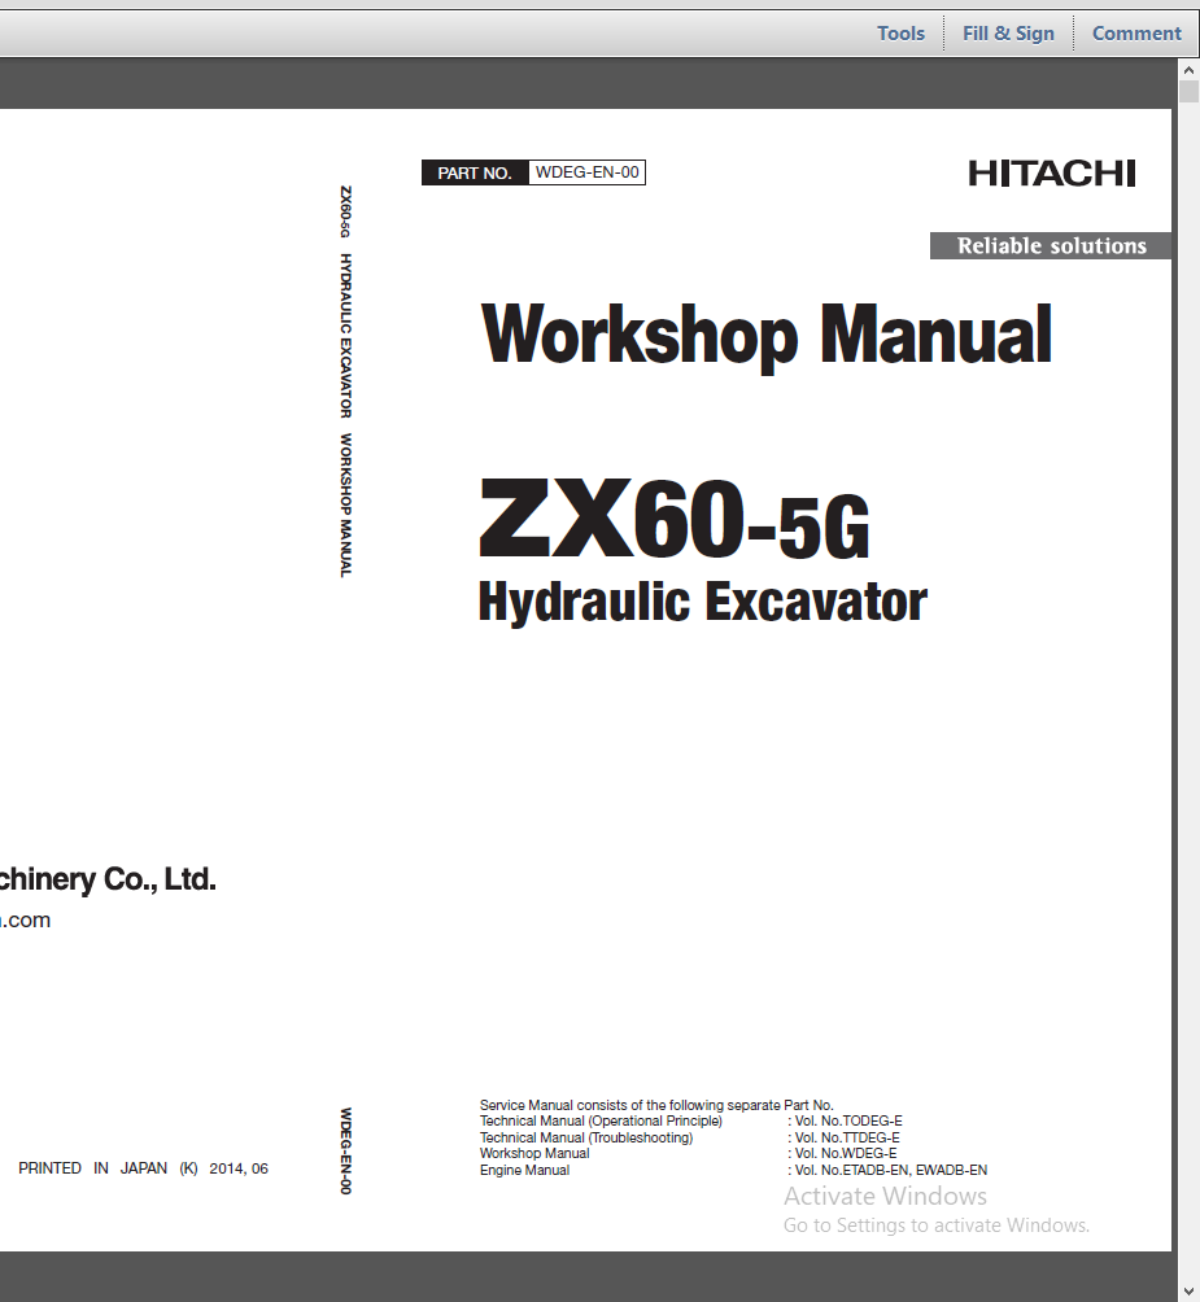 Hitachi ZX60-5G Workshop Manual and Technical Manual